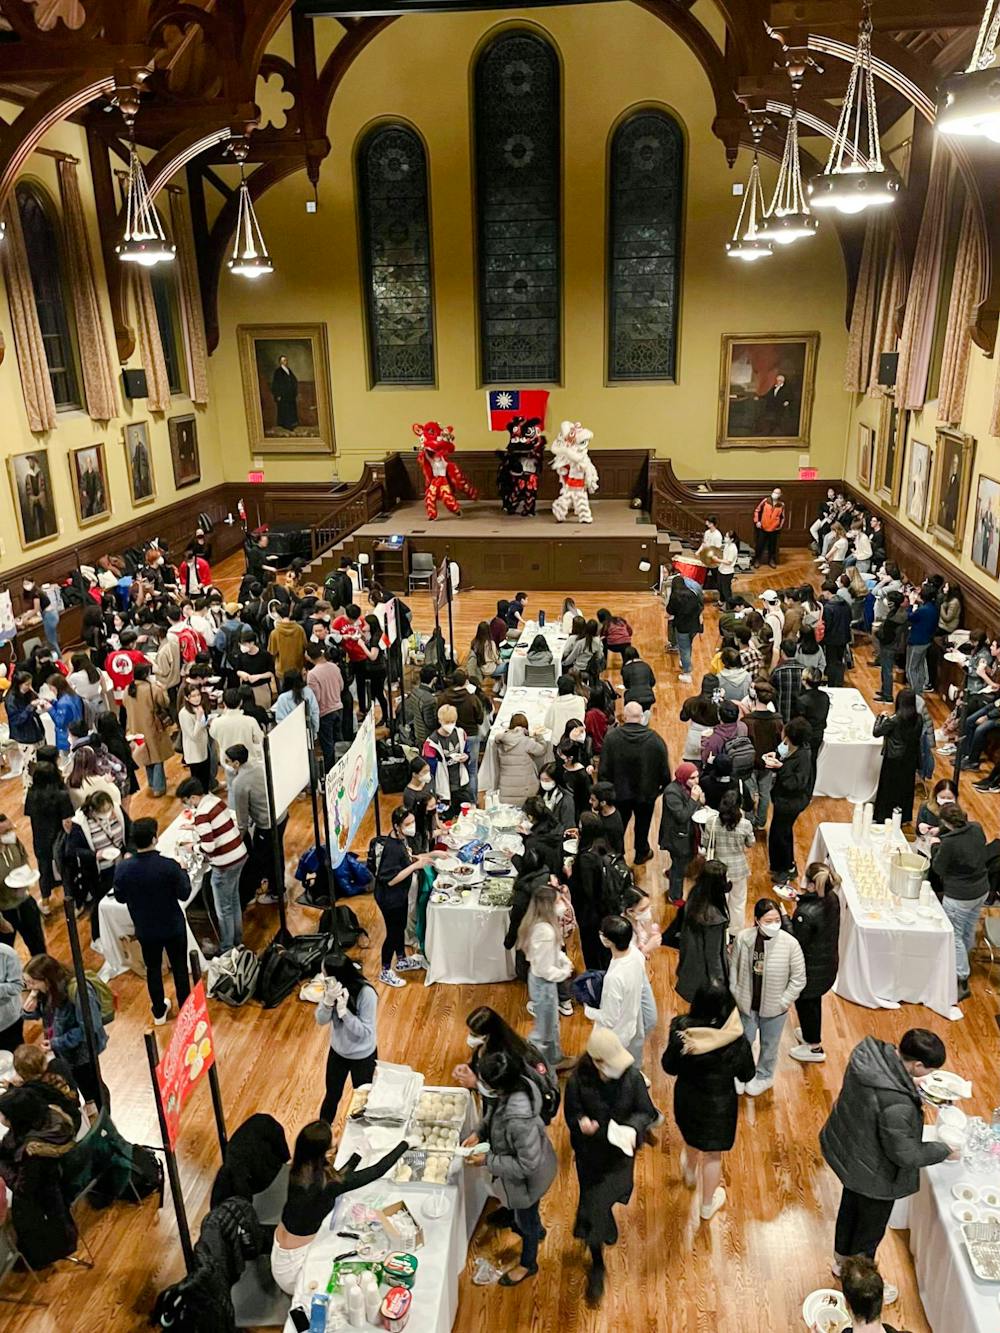 <p>Because many of the organization’s board members weren’t students when the last market was held, the group felt a disconnect in its institutional knowledge base, which posed organizing challenges.</p><p></p><p>Courtesy of Hailey Chen</p>